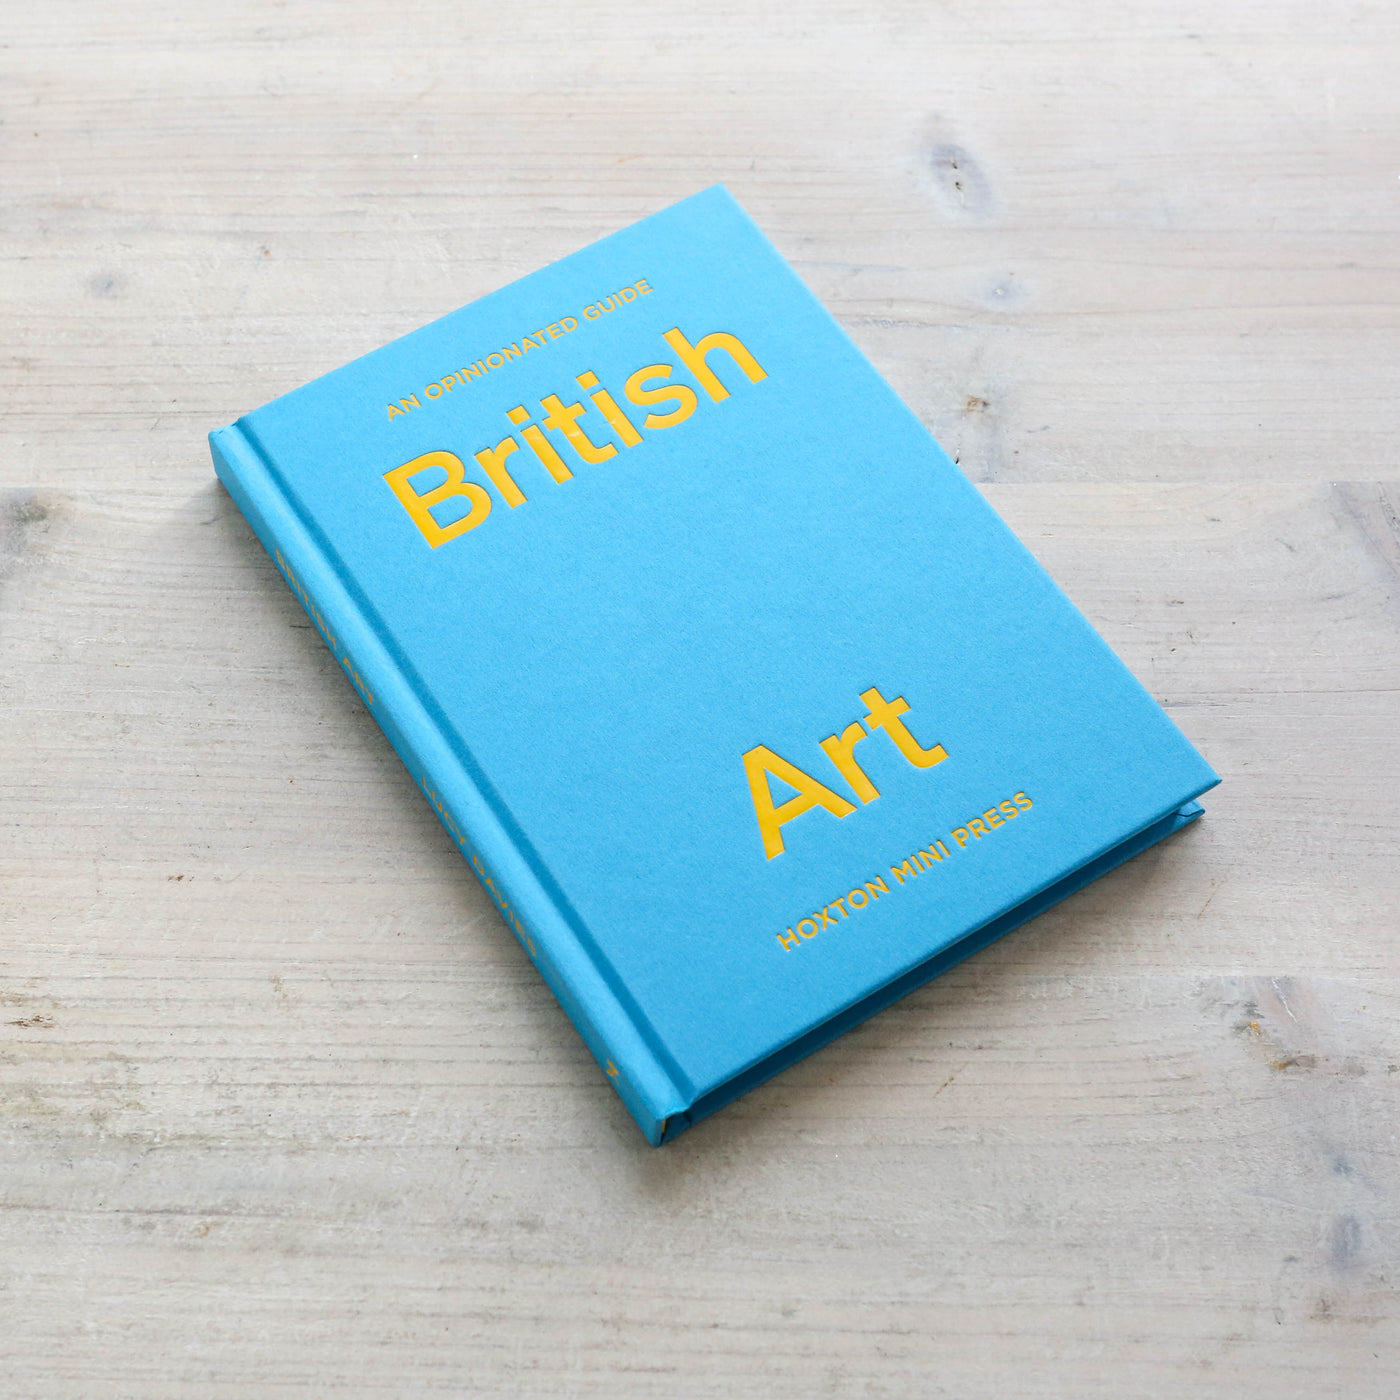 British Art - An Opinionated Guide